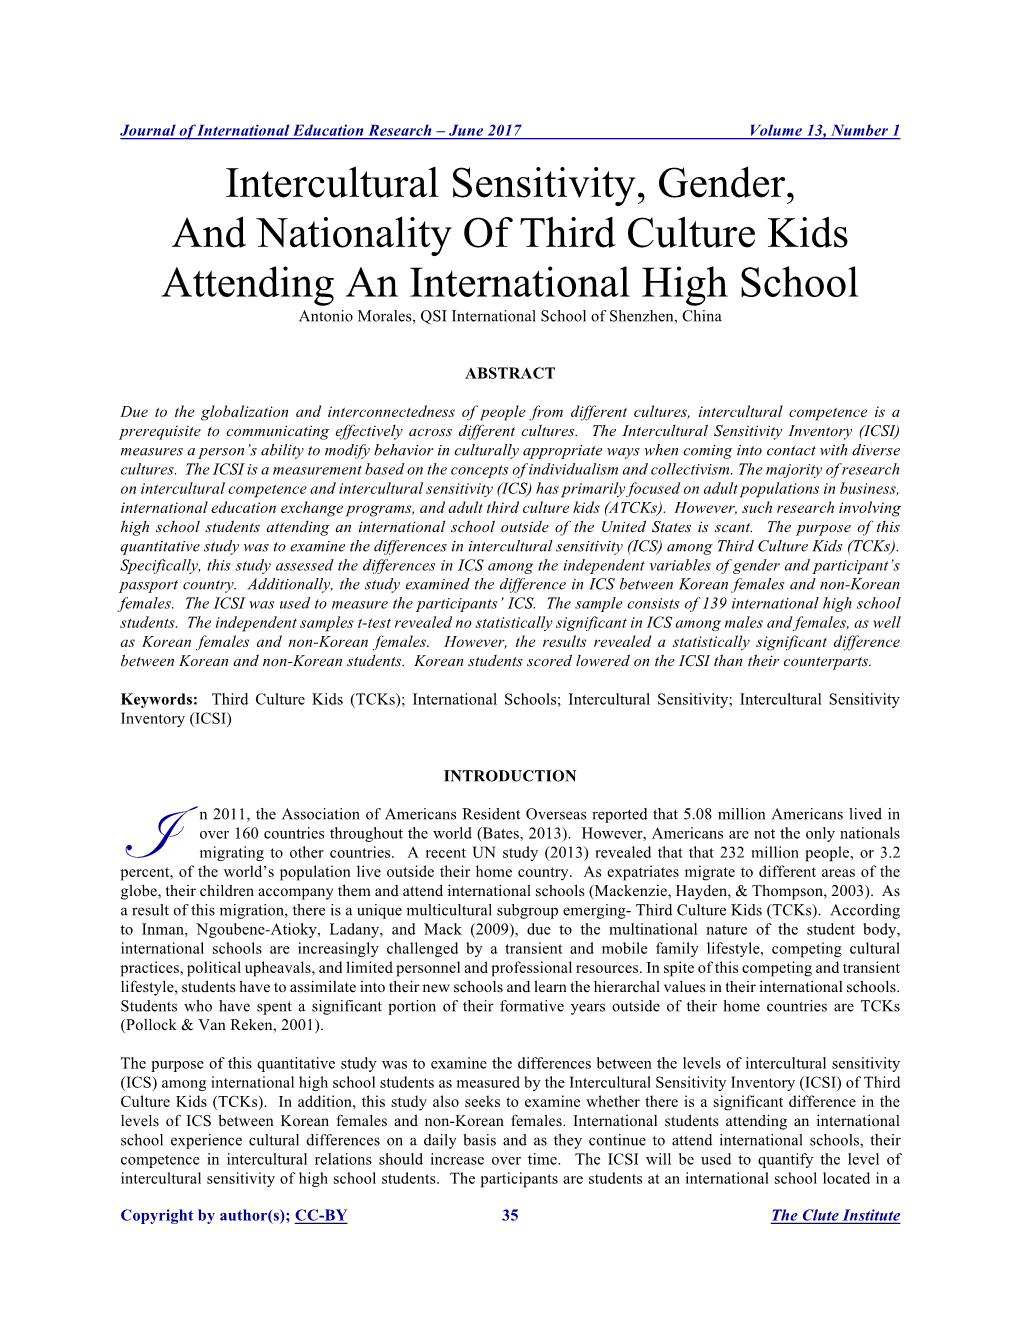 Intercultural Sensitivity, Gender, and Nationality of Third Culture Kids